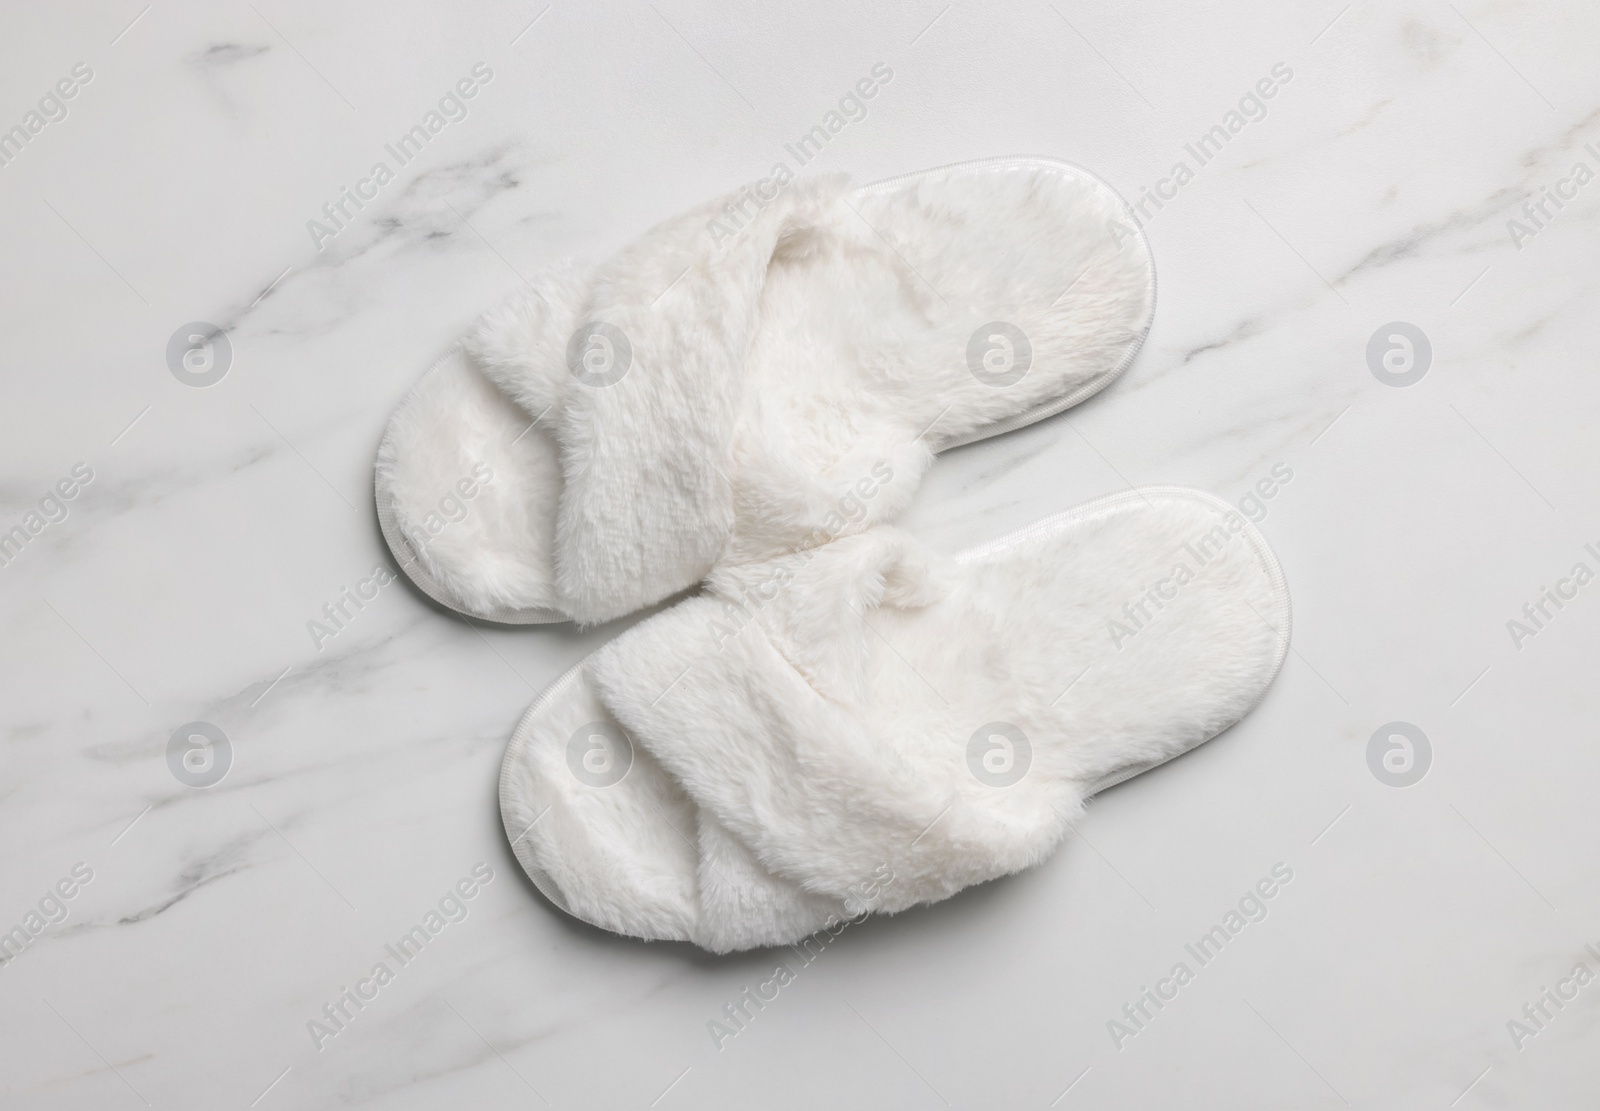 Photo of Pair of soft slippers on white marble floor, top view